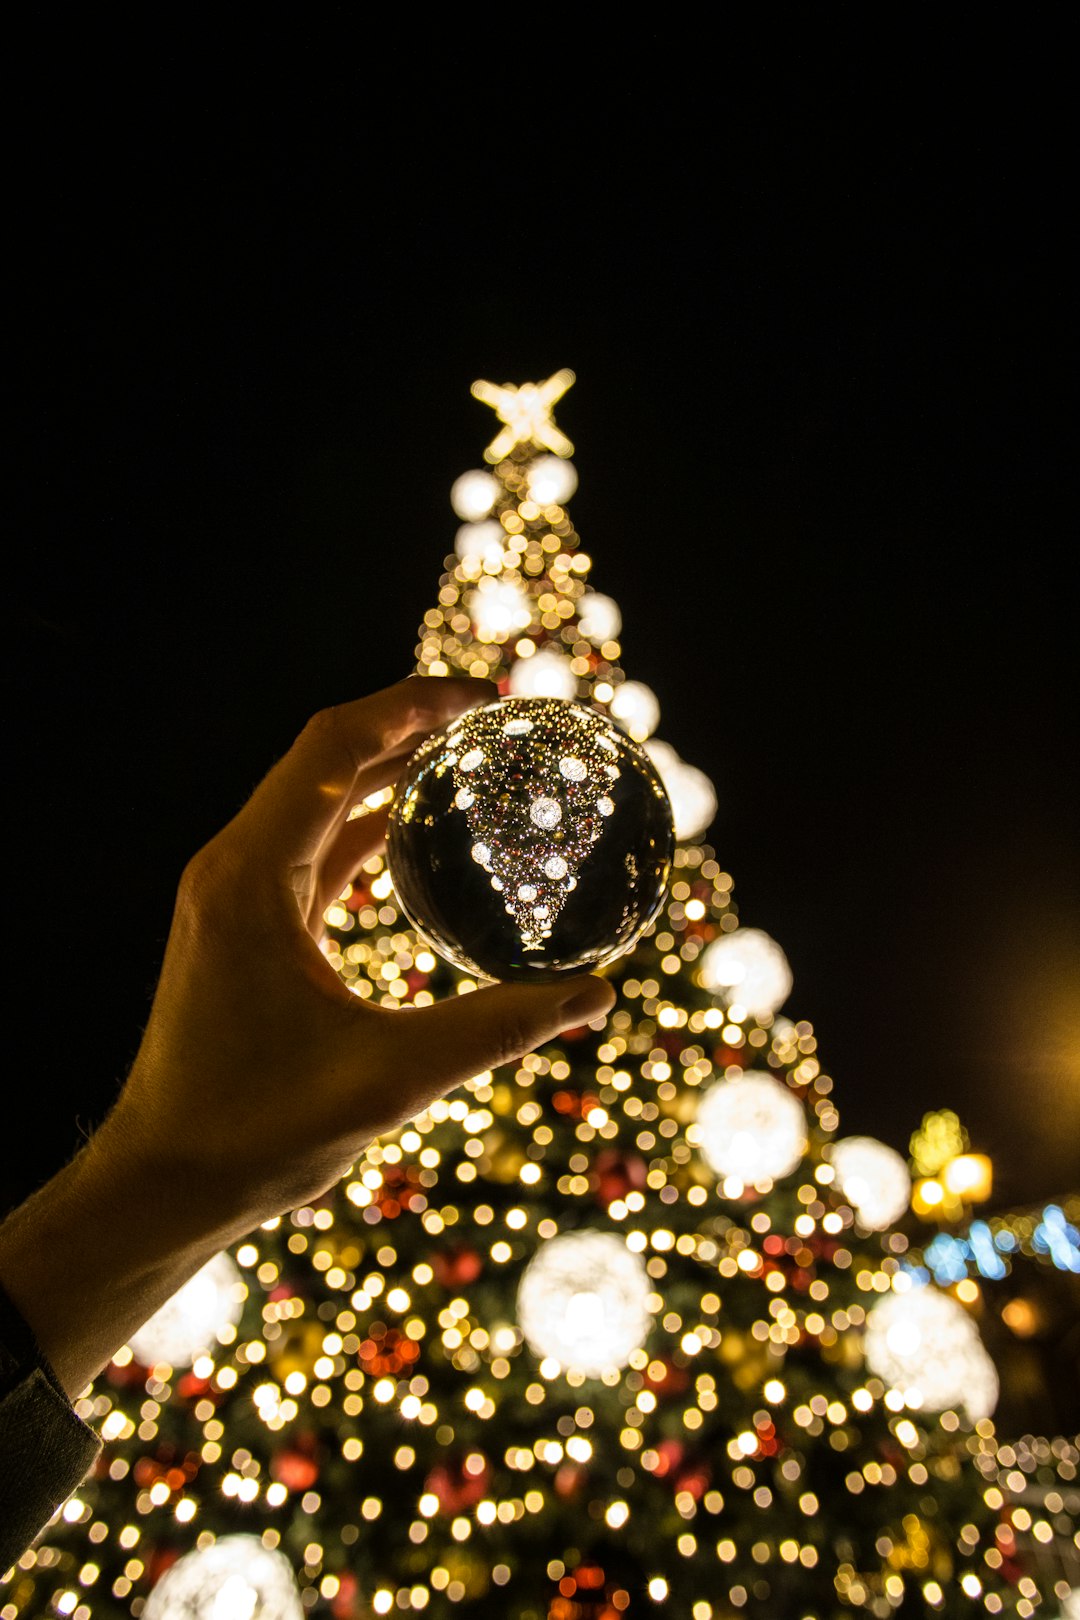 person lifting bauble near Christmas tree